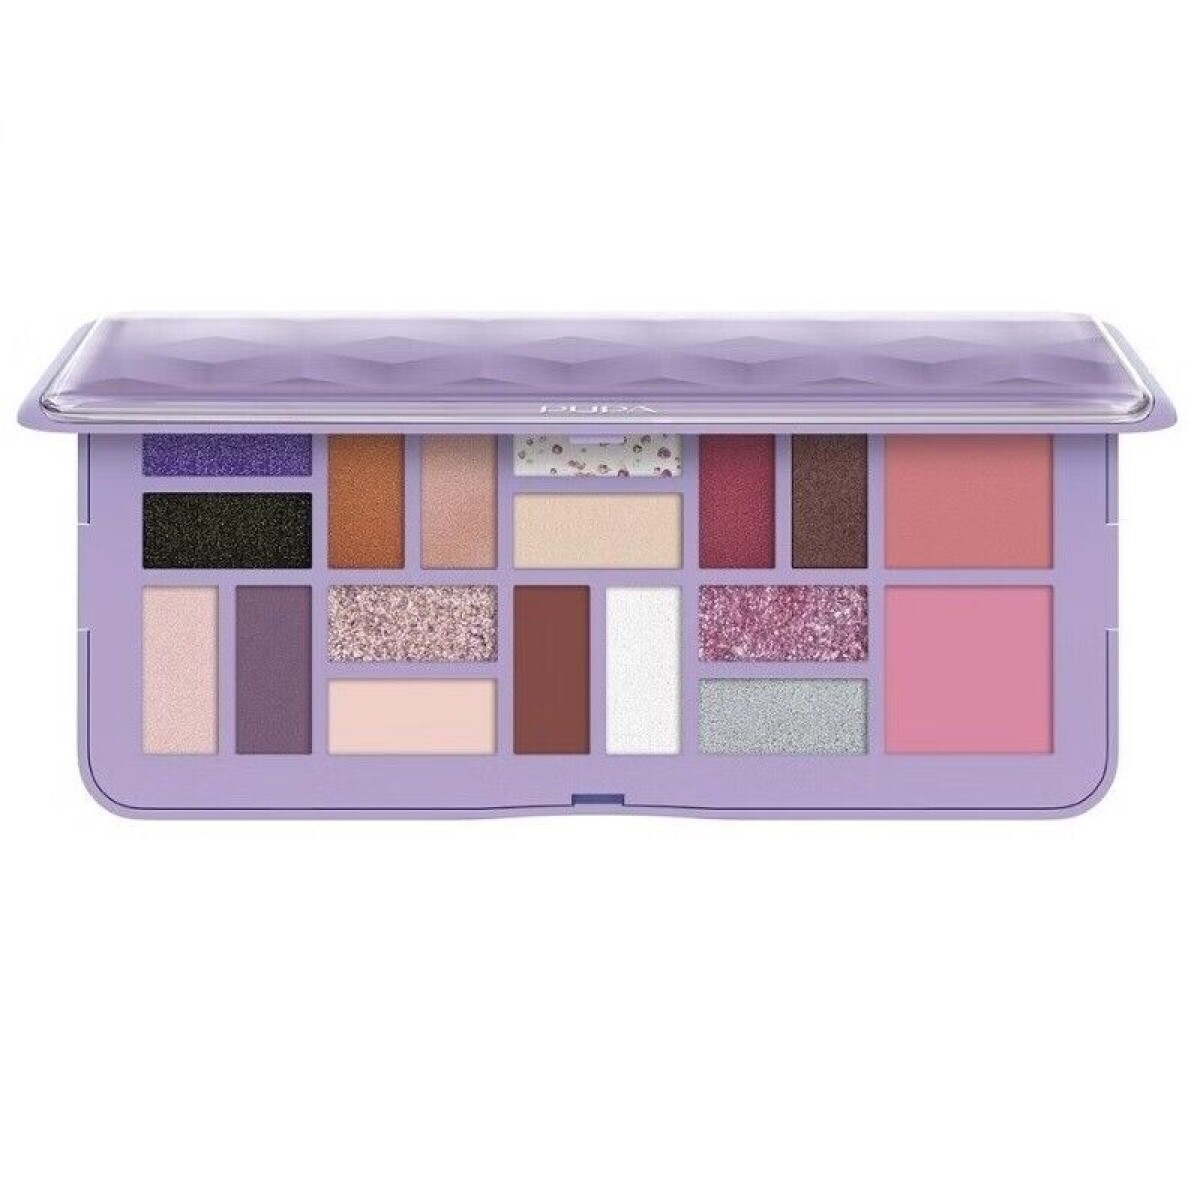 Pupa Palette L 3d Effects Lilac Shades 